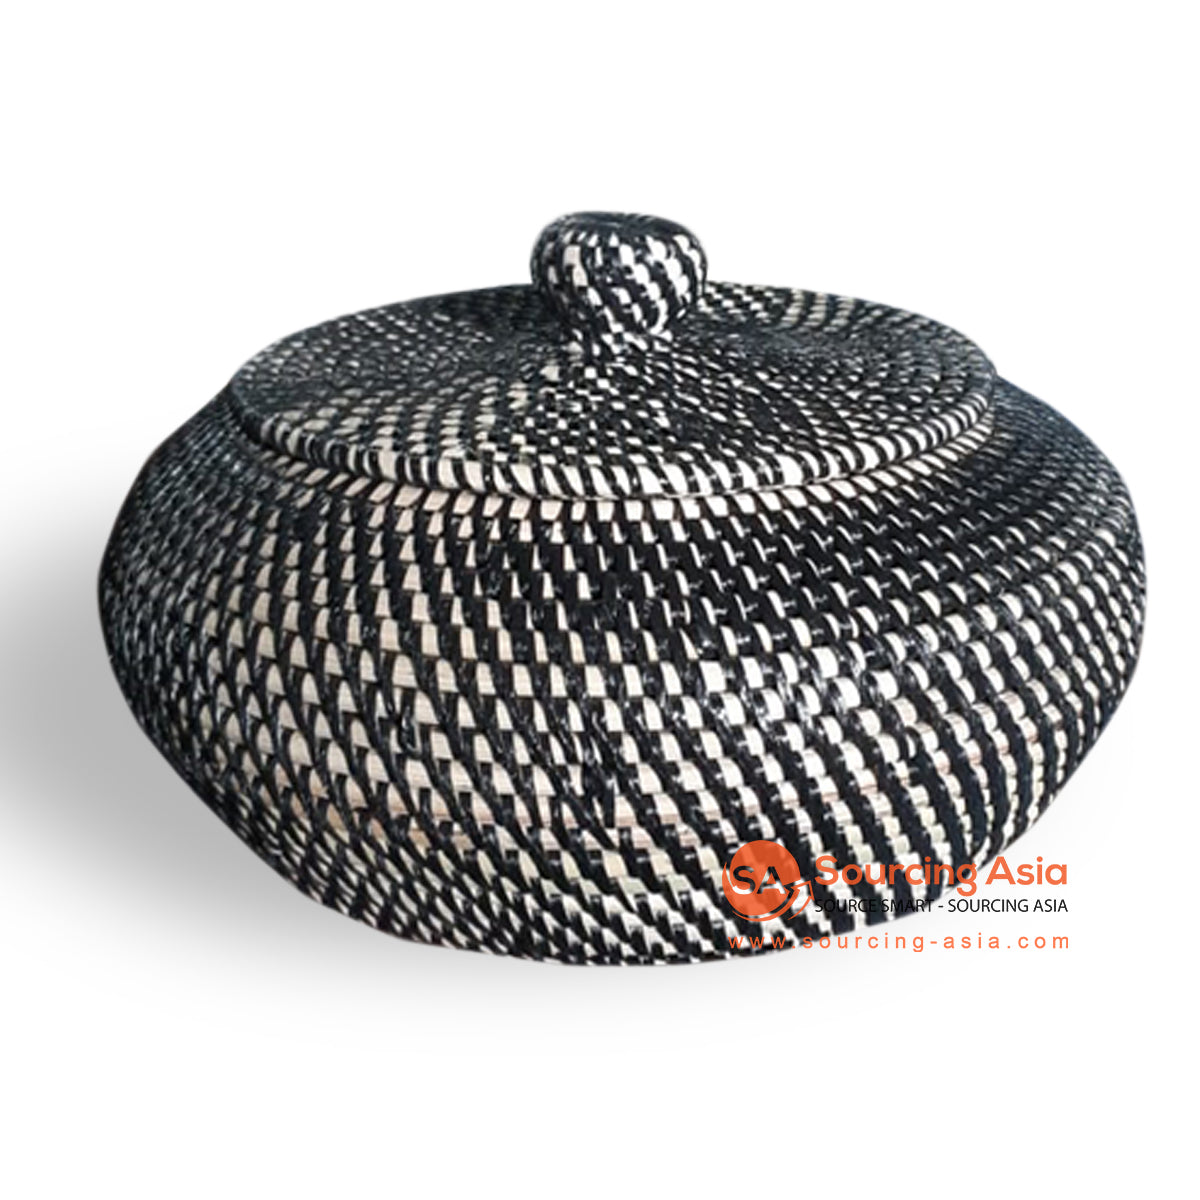 ALI061 BLACK RATTAN WOVEN BOWL WITH LID